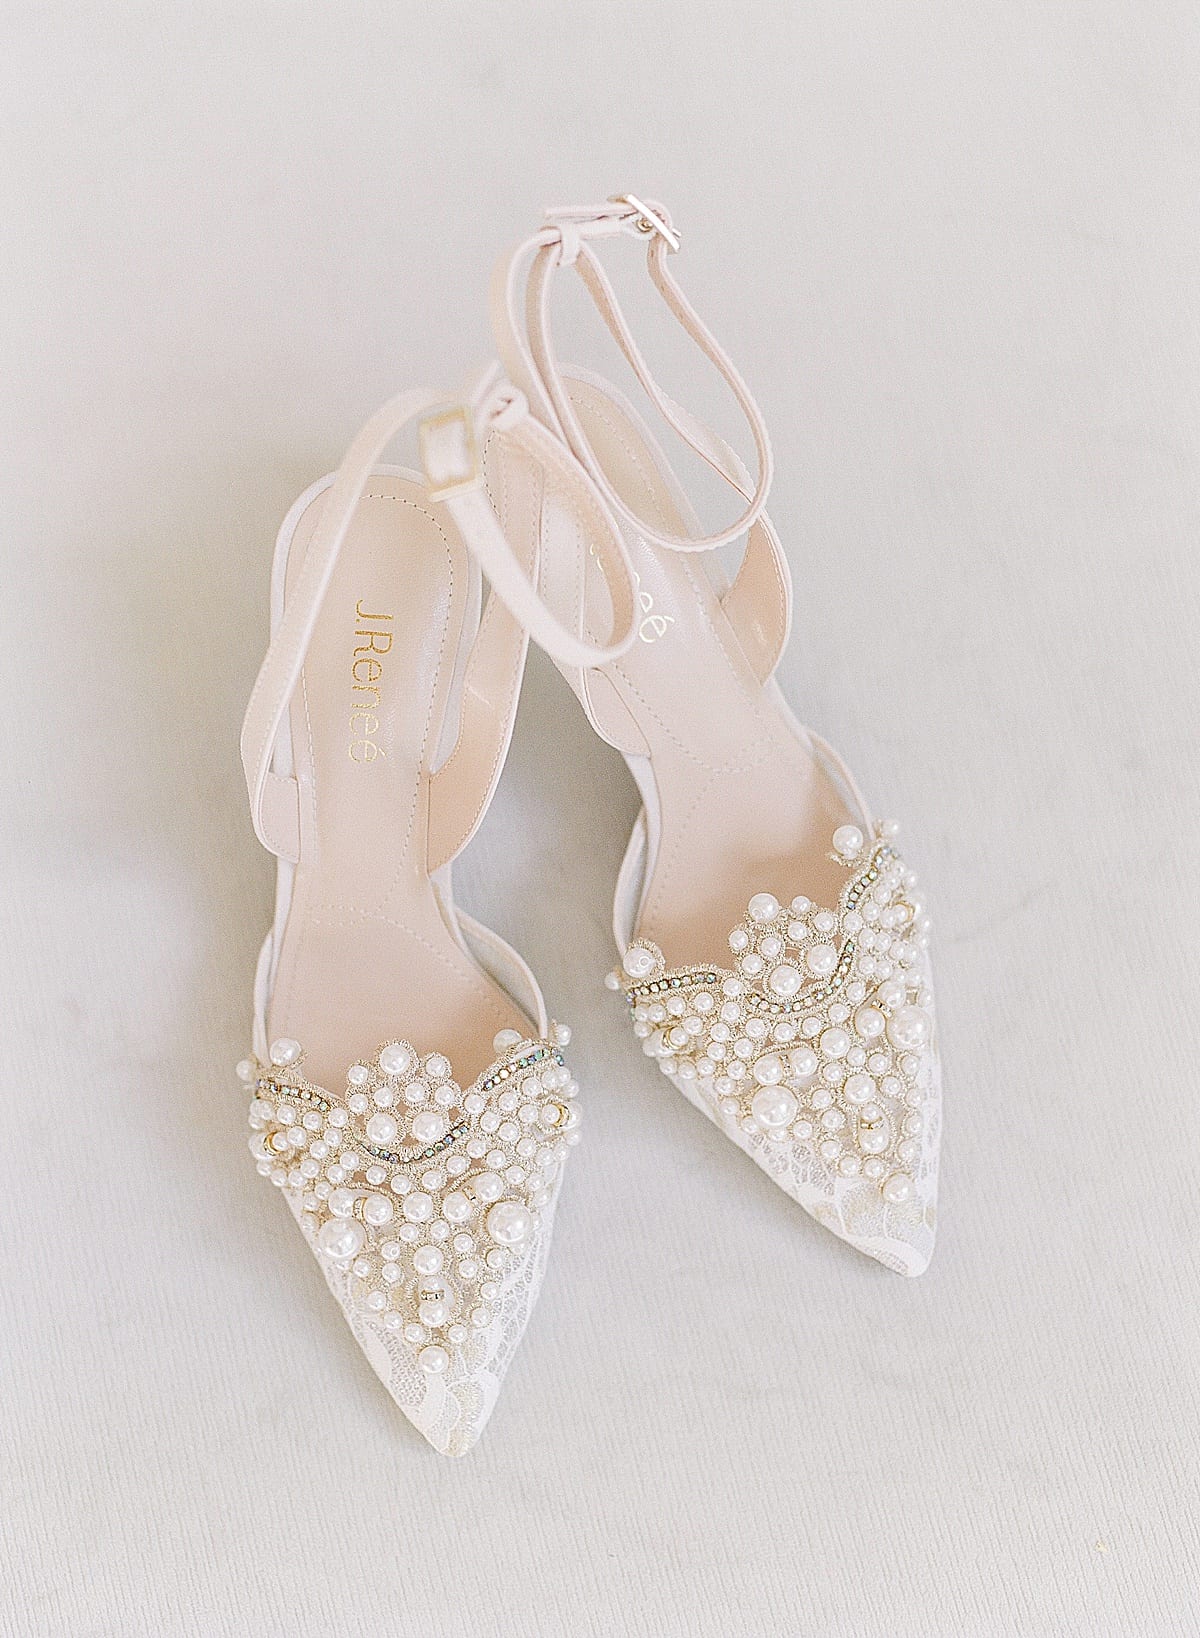 Bridal Wedding Shoes With Pearls on The Toes Photo